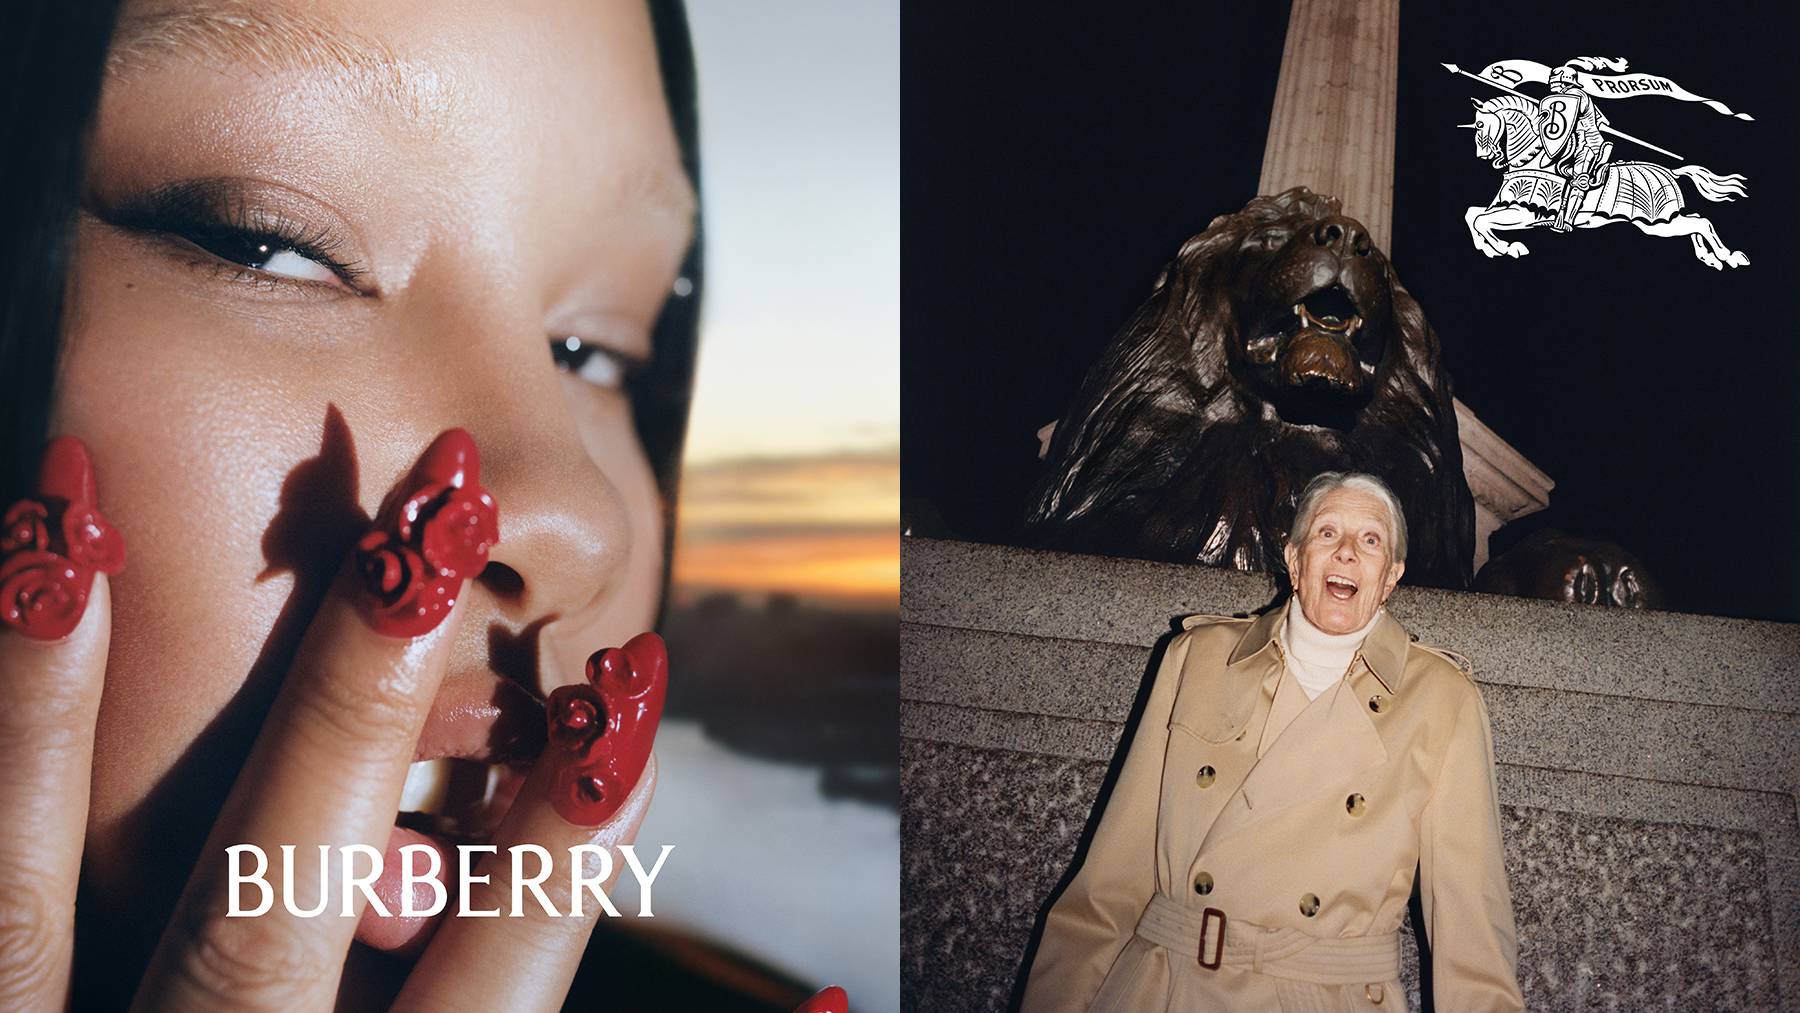 Shygirl and Vanessa Redgrave are among the British talents cast in the new Burberry campaign, the first under the creative direction of Daniel Lee.